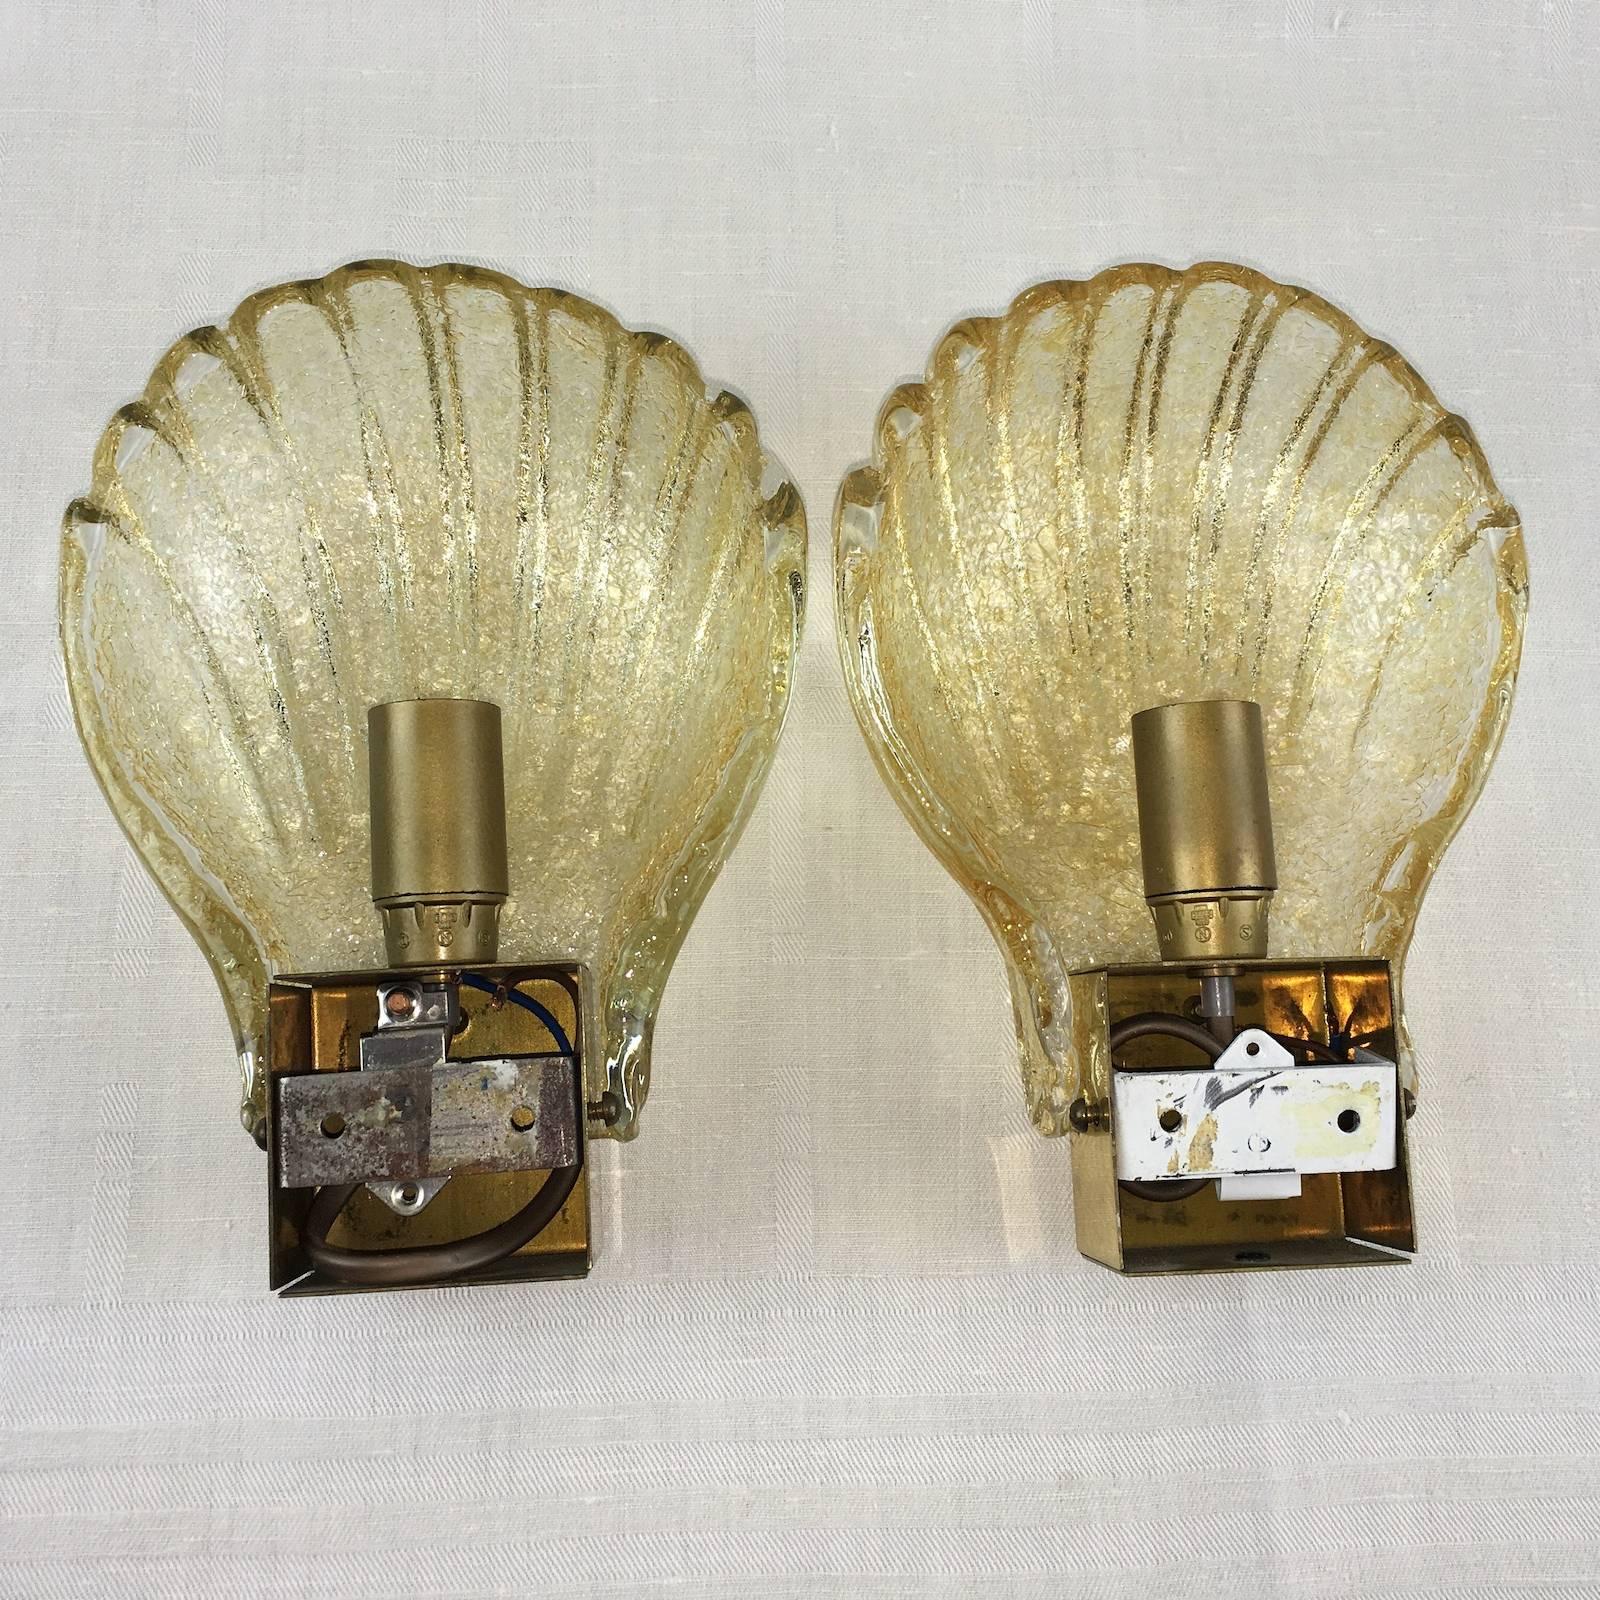 A pair of 1960s sea shell form sconces, produced in Italy, in textured glass, with tones of gold, affixed against a polished brass base. Each Fixture requires one European E14 candelabra bulb, each bulb up to 40 watts.